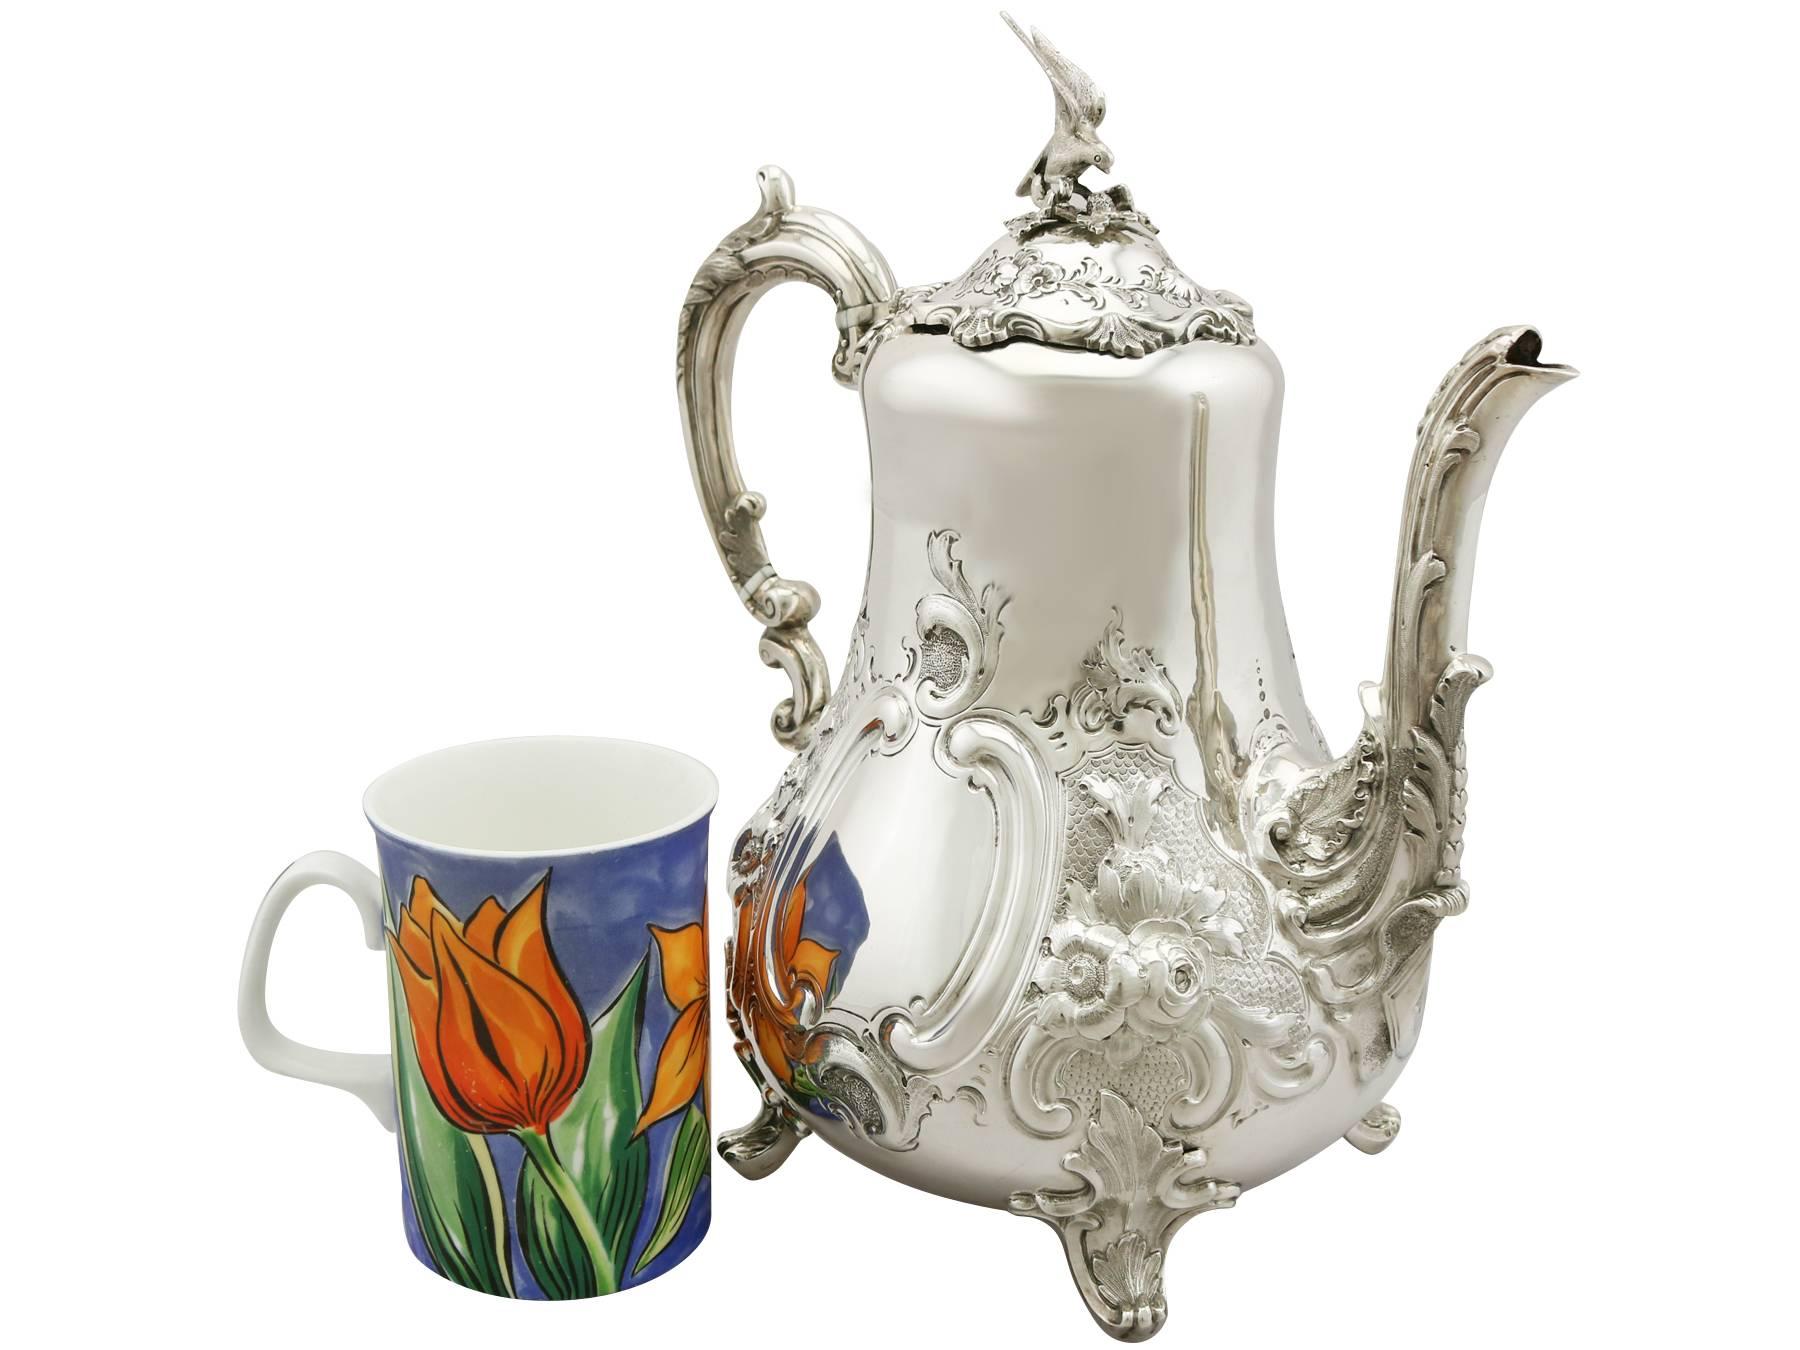 An exceptional, fine and impressive antique Victorian English sterling silver coffee pot in the Louis style; an addition to the silver tea ware collection

This exceptional antique Victorian sterling silver coffee pot has a baluster form in the